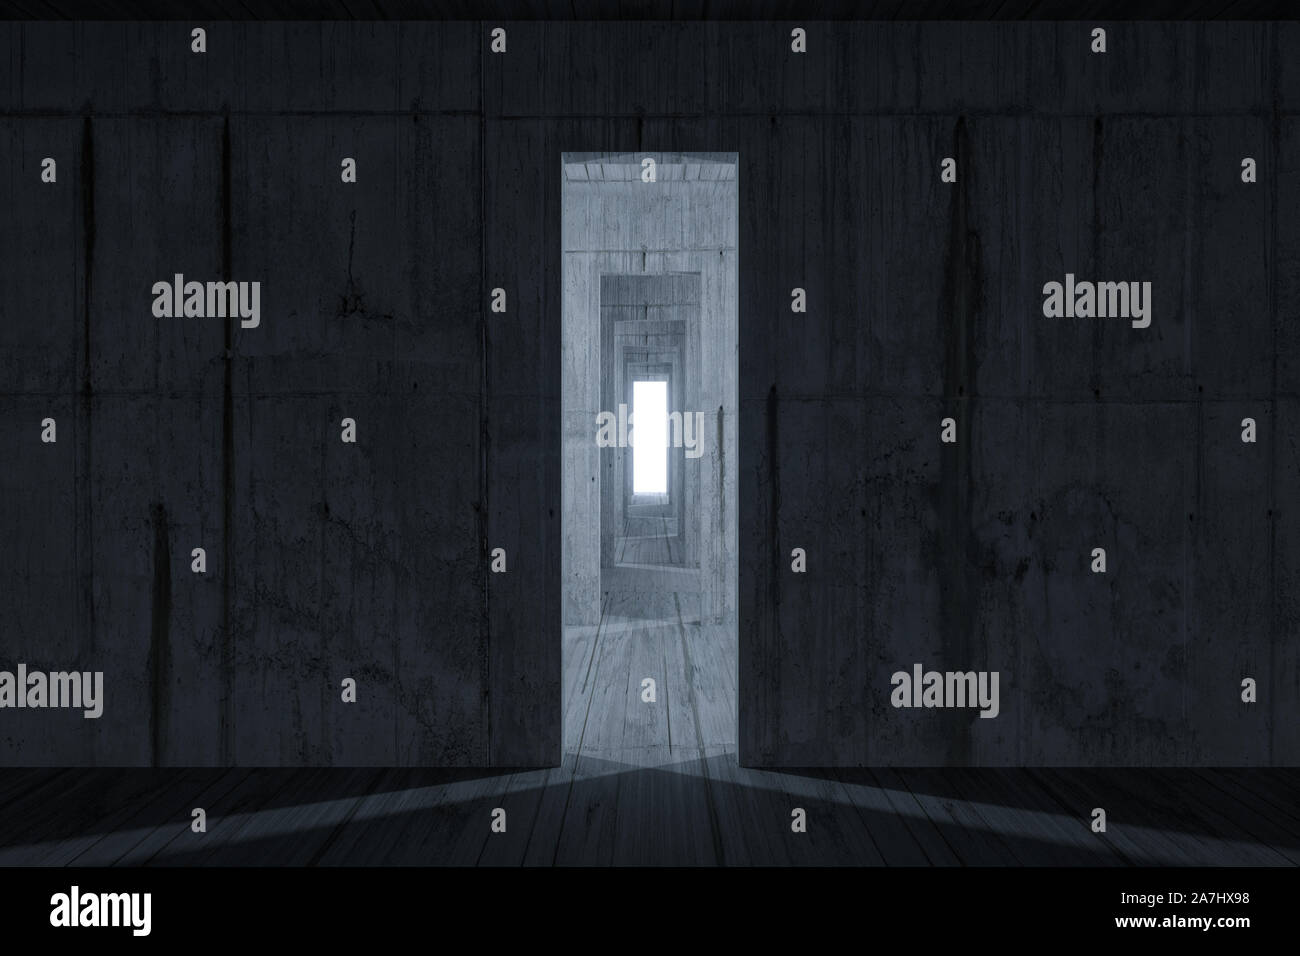 Dark Room With A Glowing And Bright Door 3d Rendering Computer Digital Drawing Stock Photo Alamy